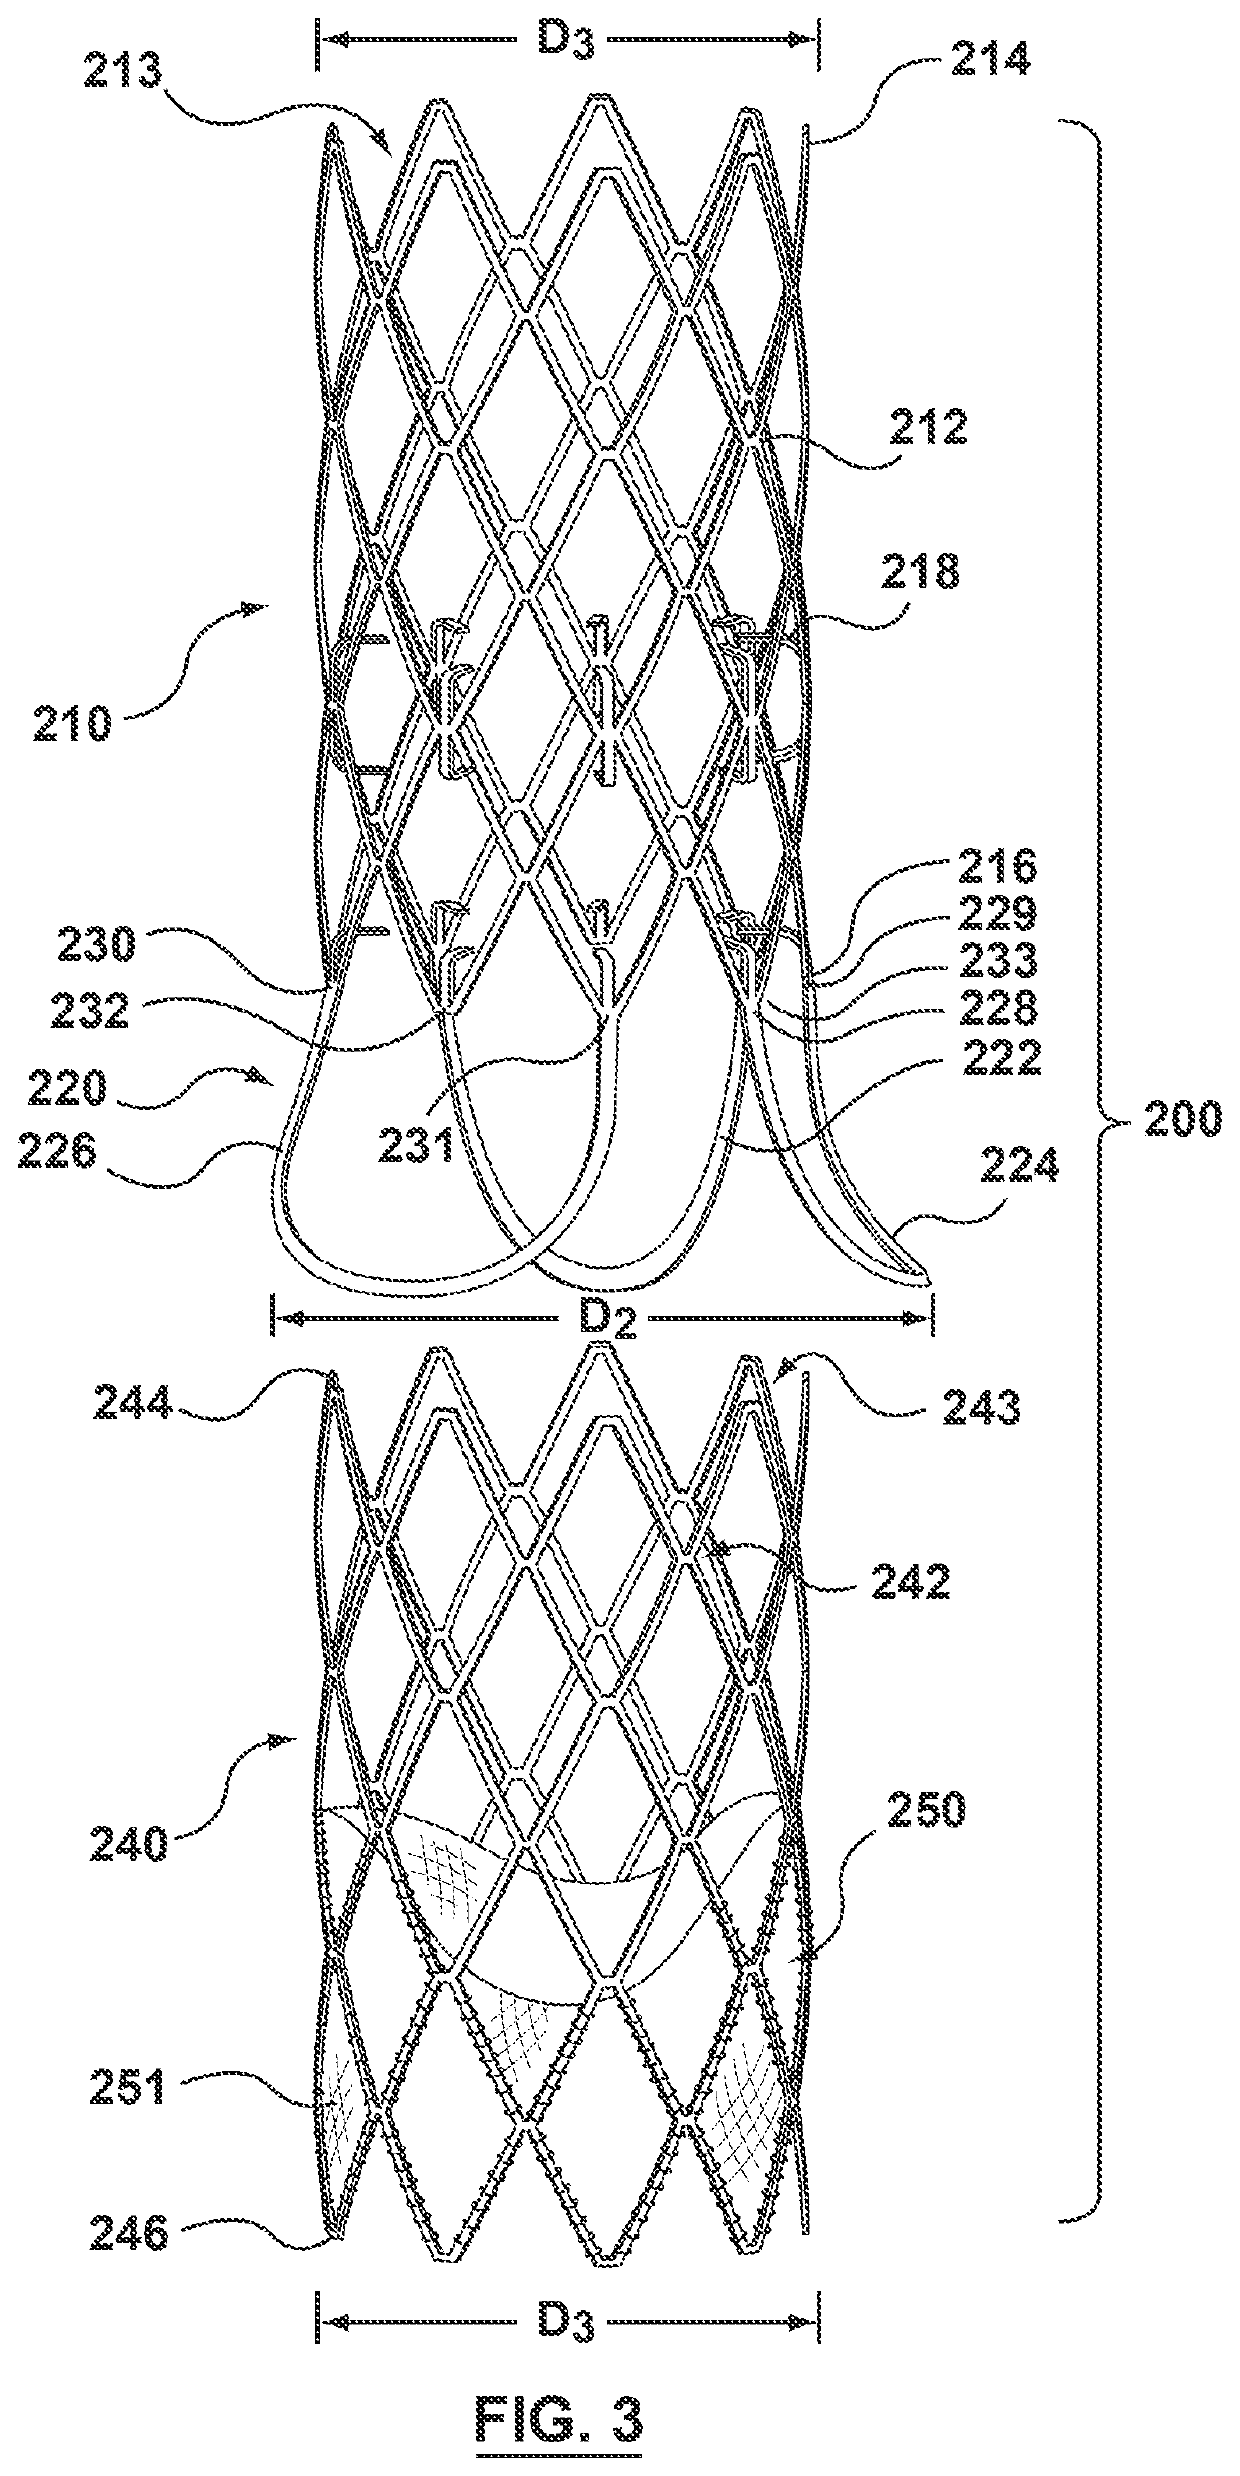 Two-piece valve prosthesis with anchor stent and valve component